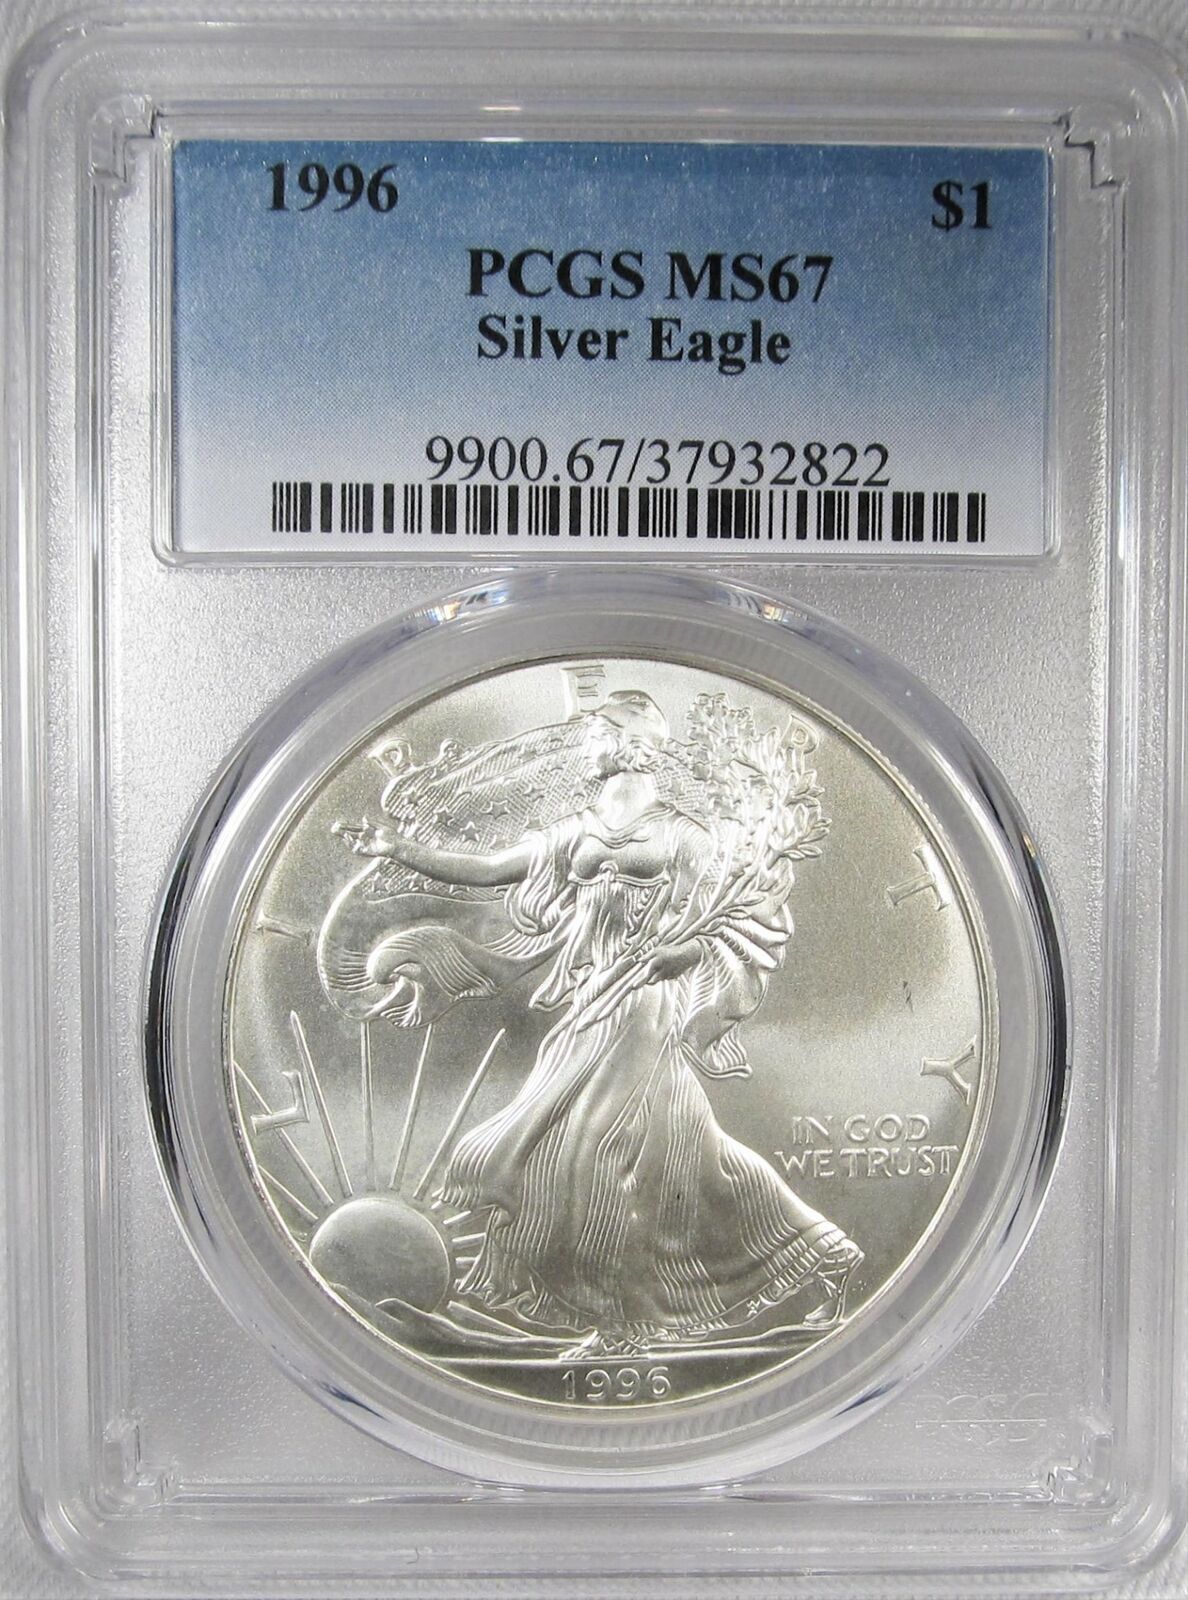 Primary image for 1996 Silver Eagle Doubled Die Obverse PCGS MS67 Coin AH378